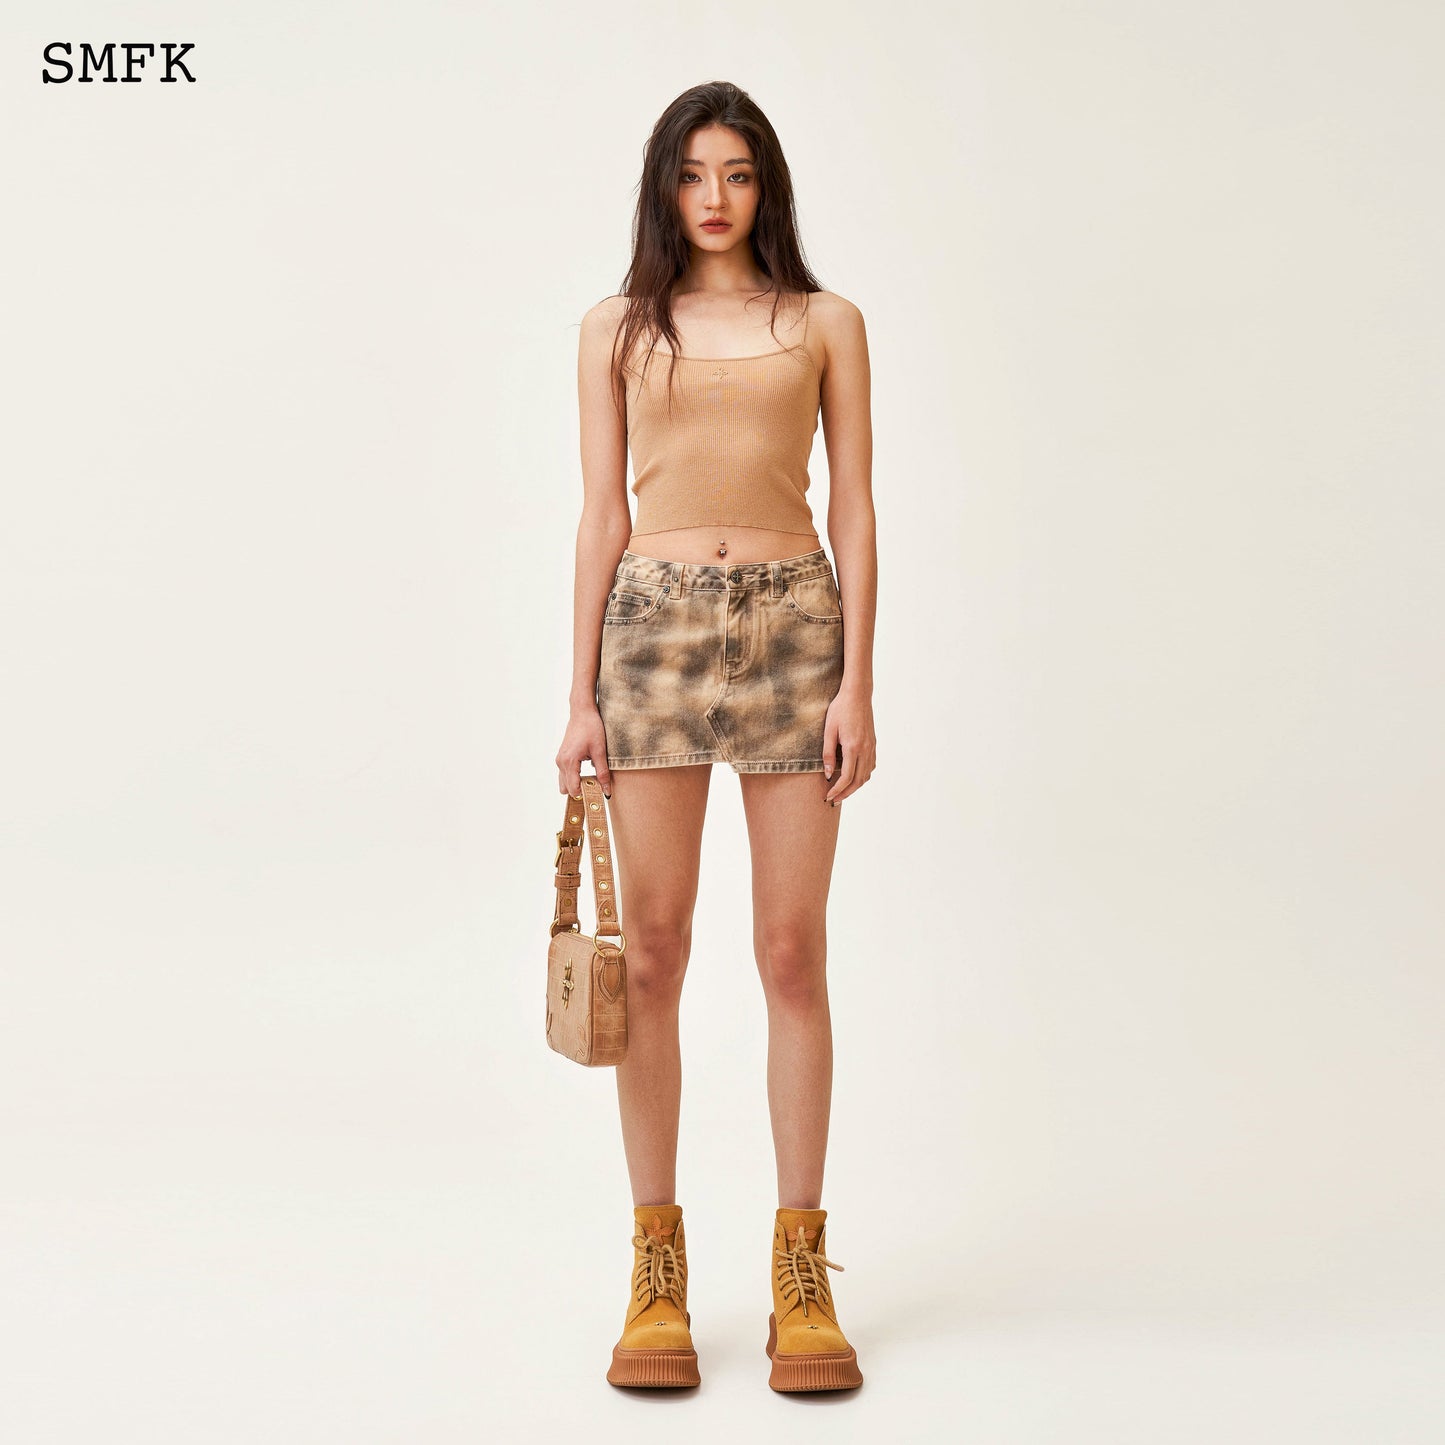 SMFK Compass Cross Classic Knitted Vest Top Nude